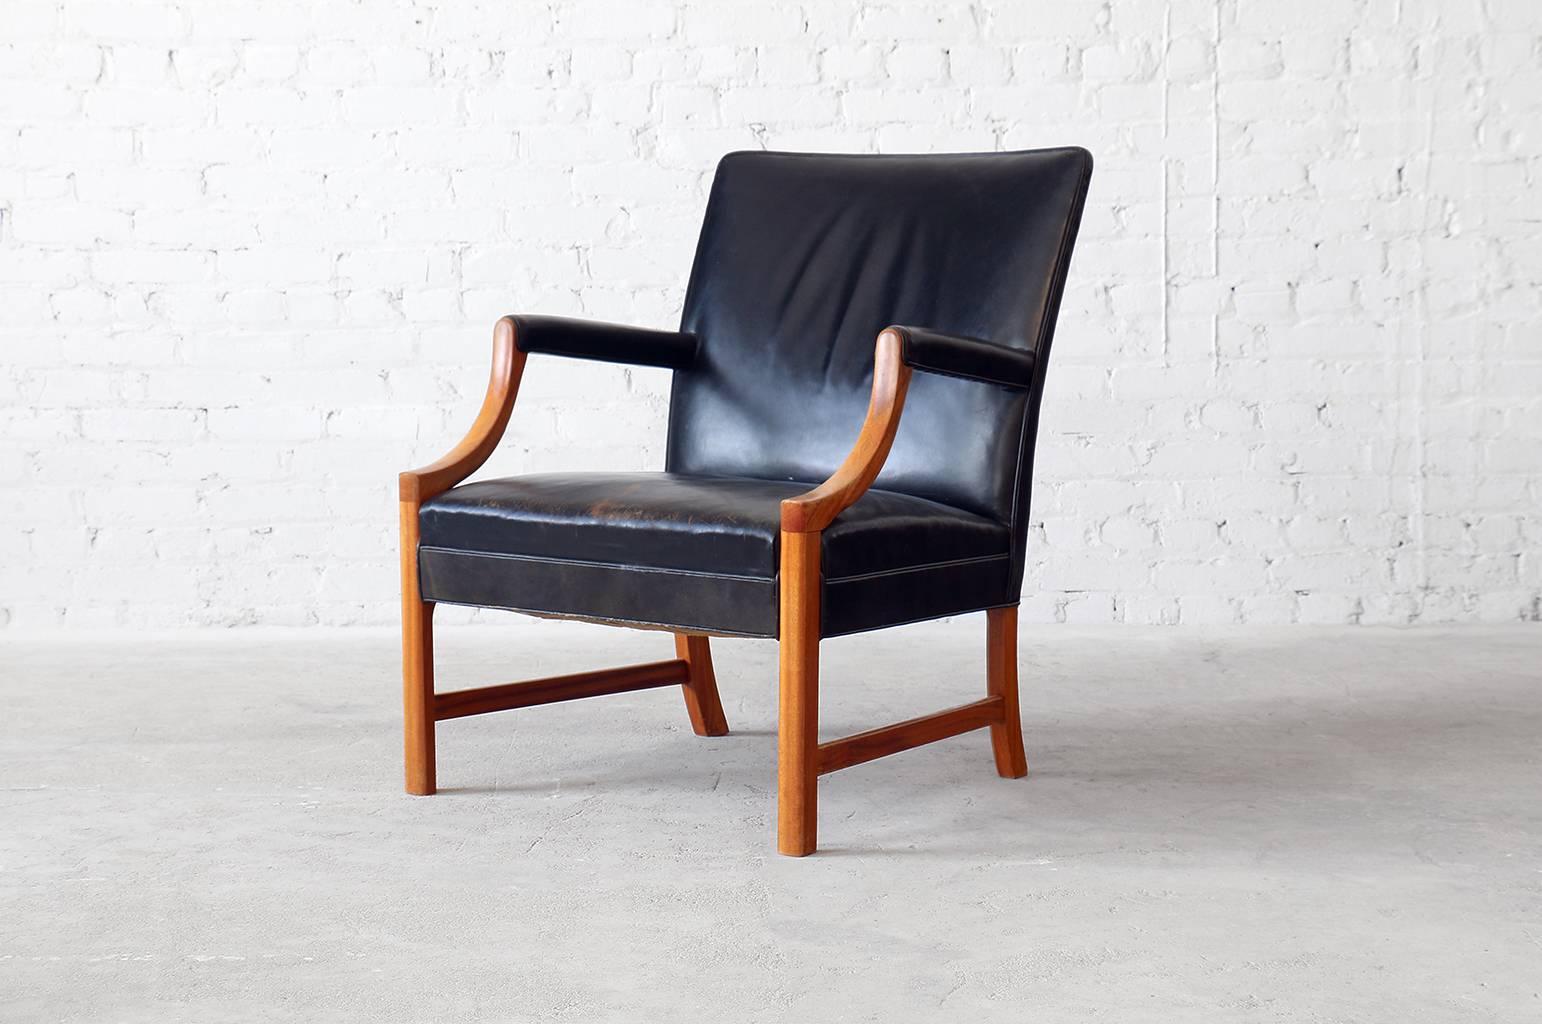 Attractive and elegant vintage easy chair designed by Ole Wanscher for A.J. Iversen. This chair was based on an English Gainsborough chair and features solid mahogany frame as well as nice patina to the original leather upholstery.

- Designed